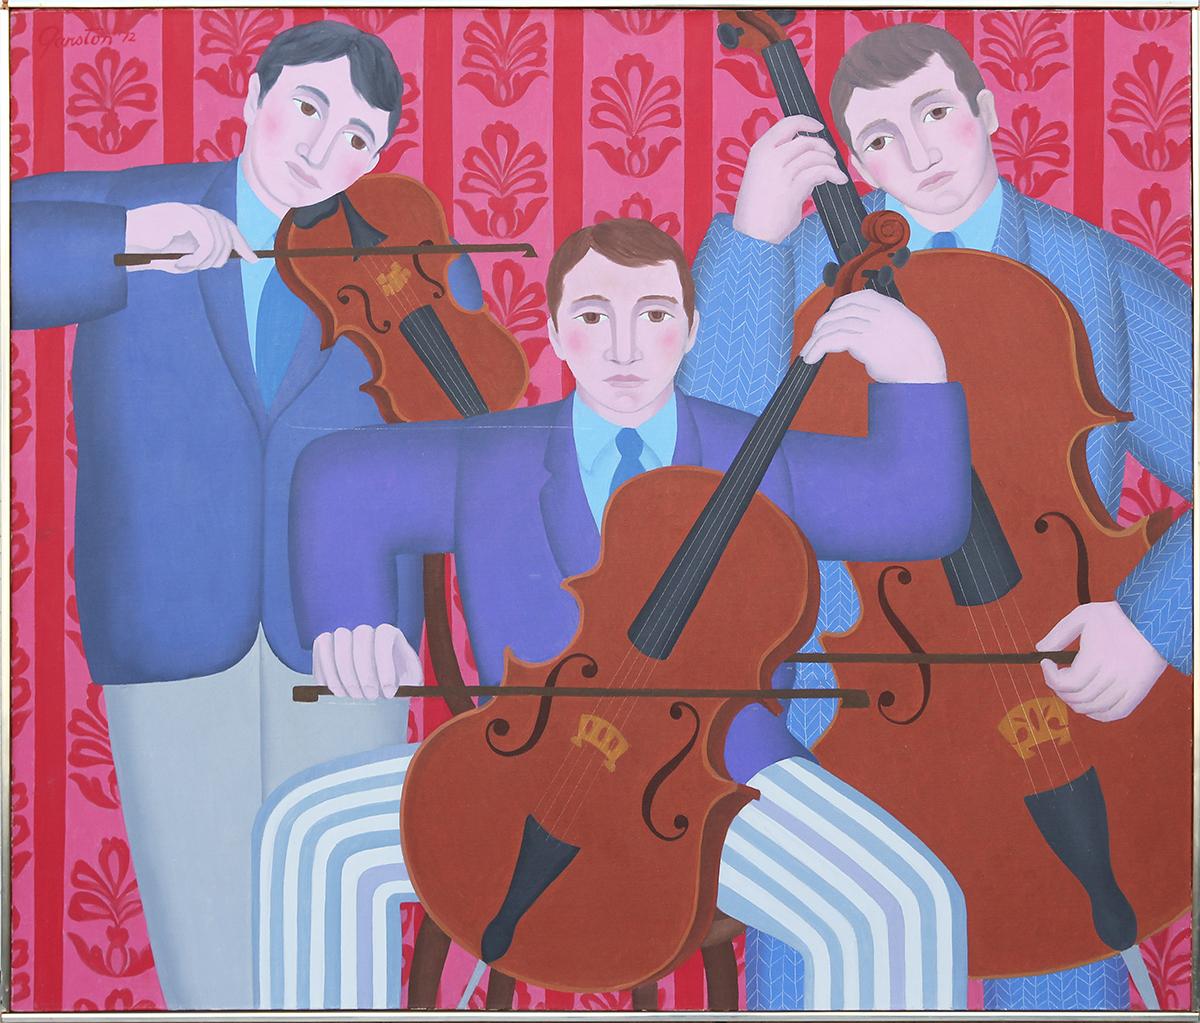 Gerald Garston Figurative Painting - Colorful Red and Blue Modern Trio of Musicians Playing String Instruments